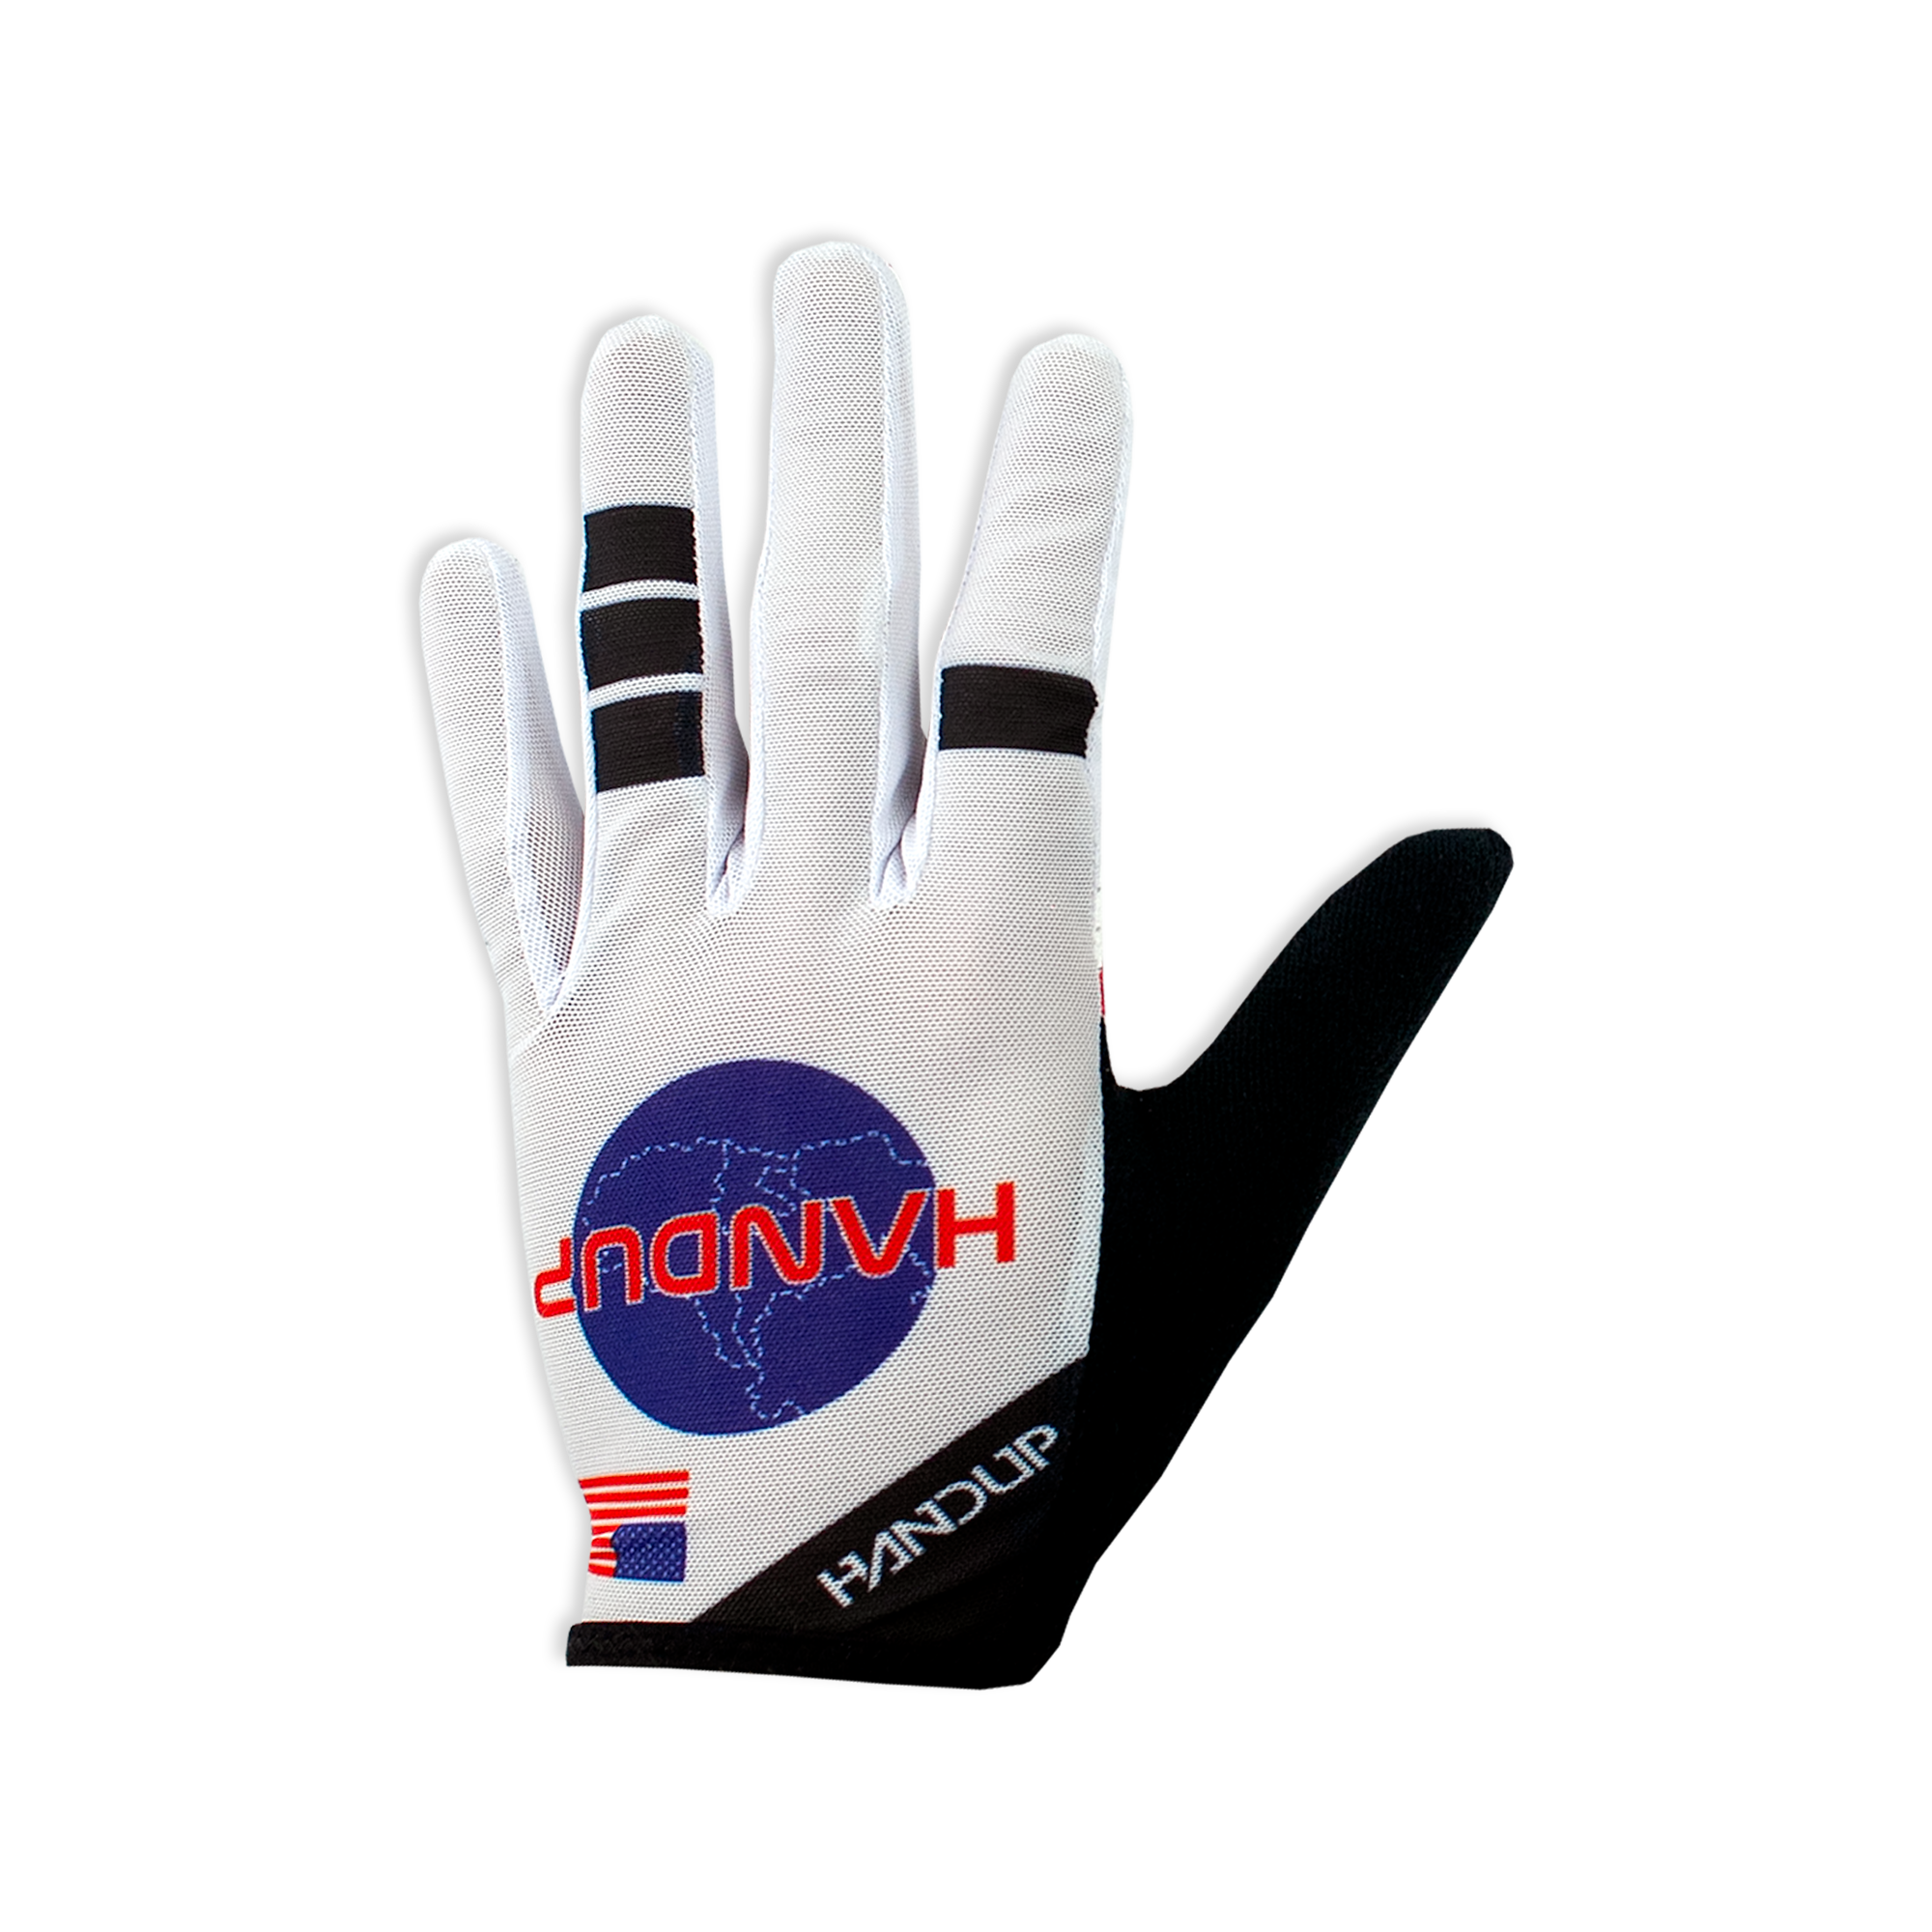 Handup Gloves  Classy, Clever Apparel, for Athletes